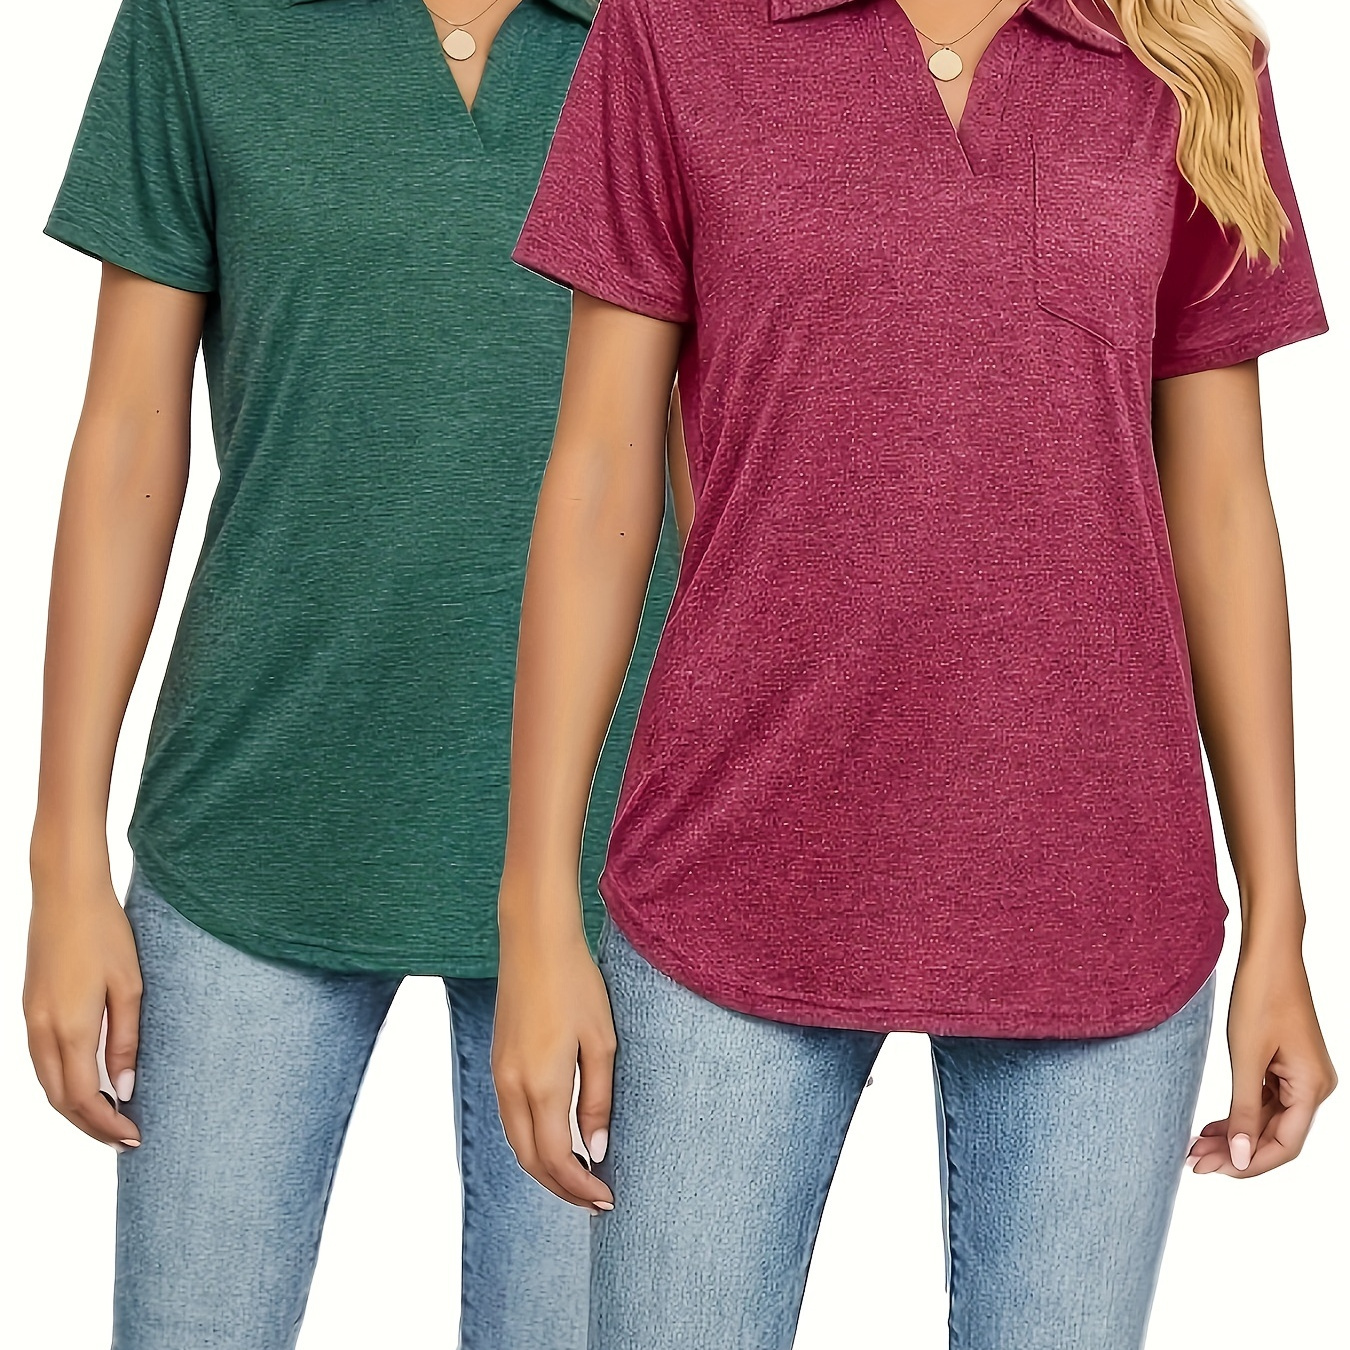 

2 Packs Plus Size Solid Collared T-shirts, Casual Short Sleeve Pocket T-shirt, Women's Plus Size clothing